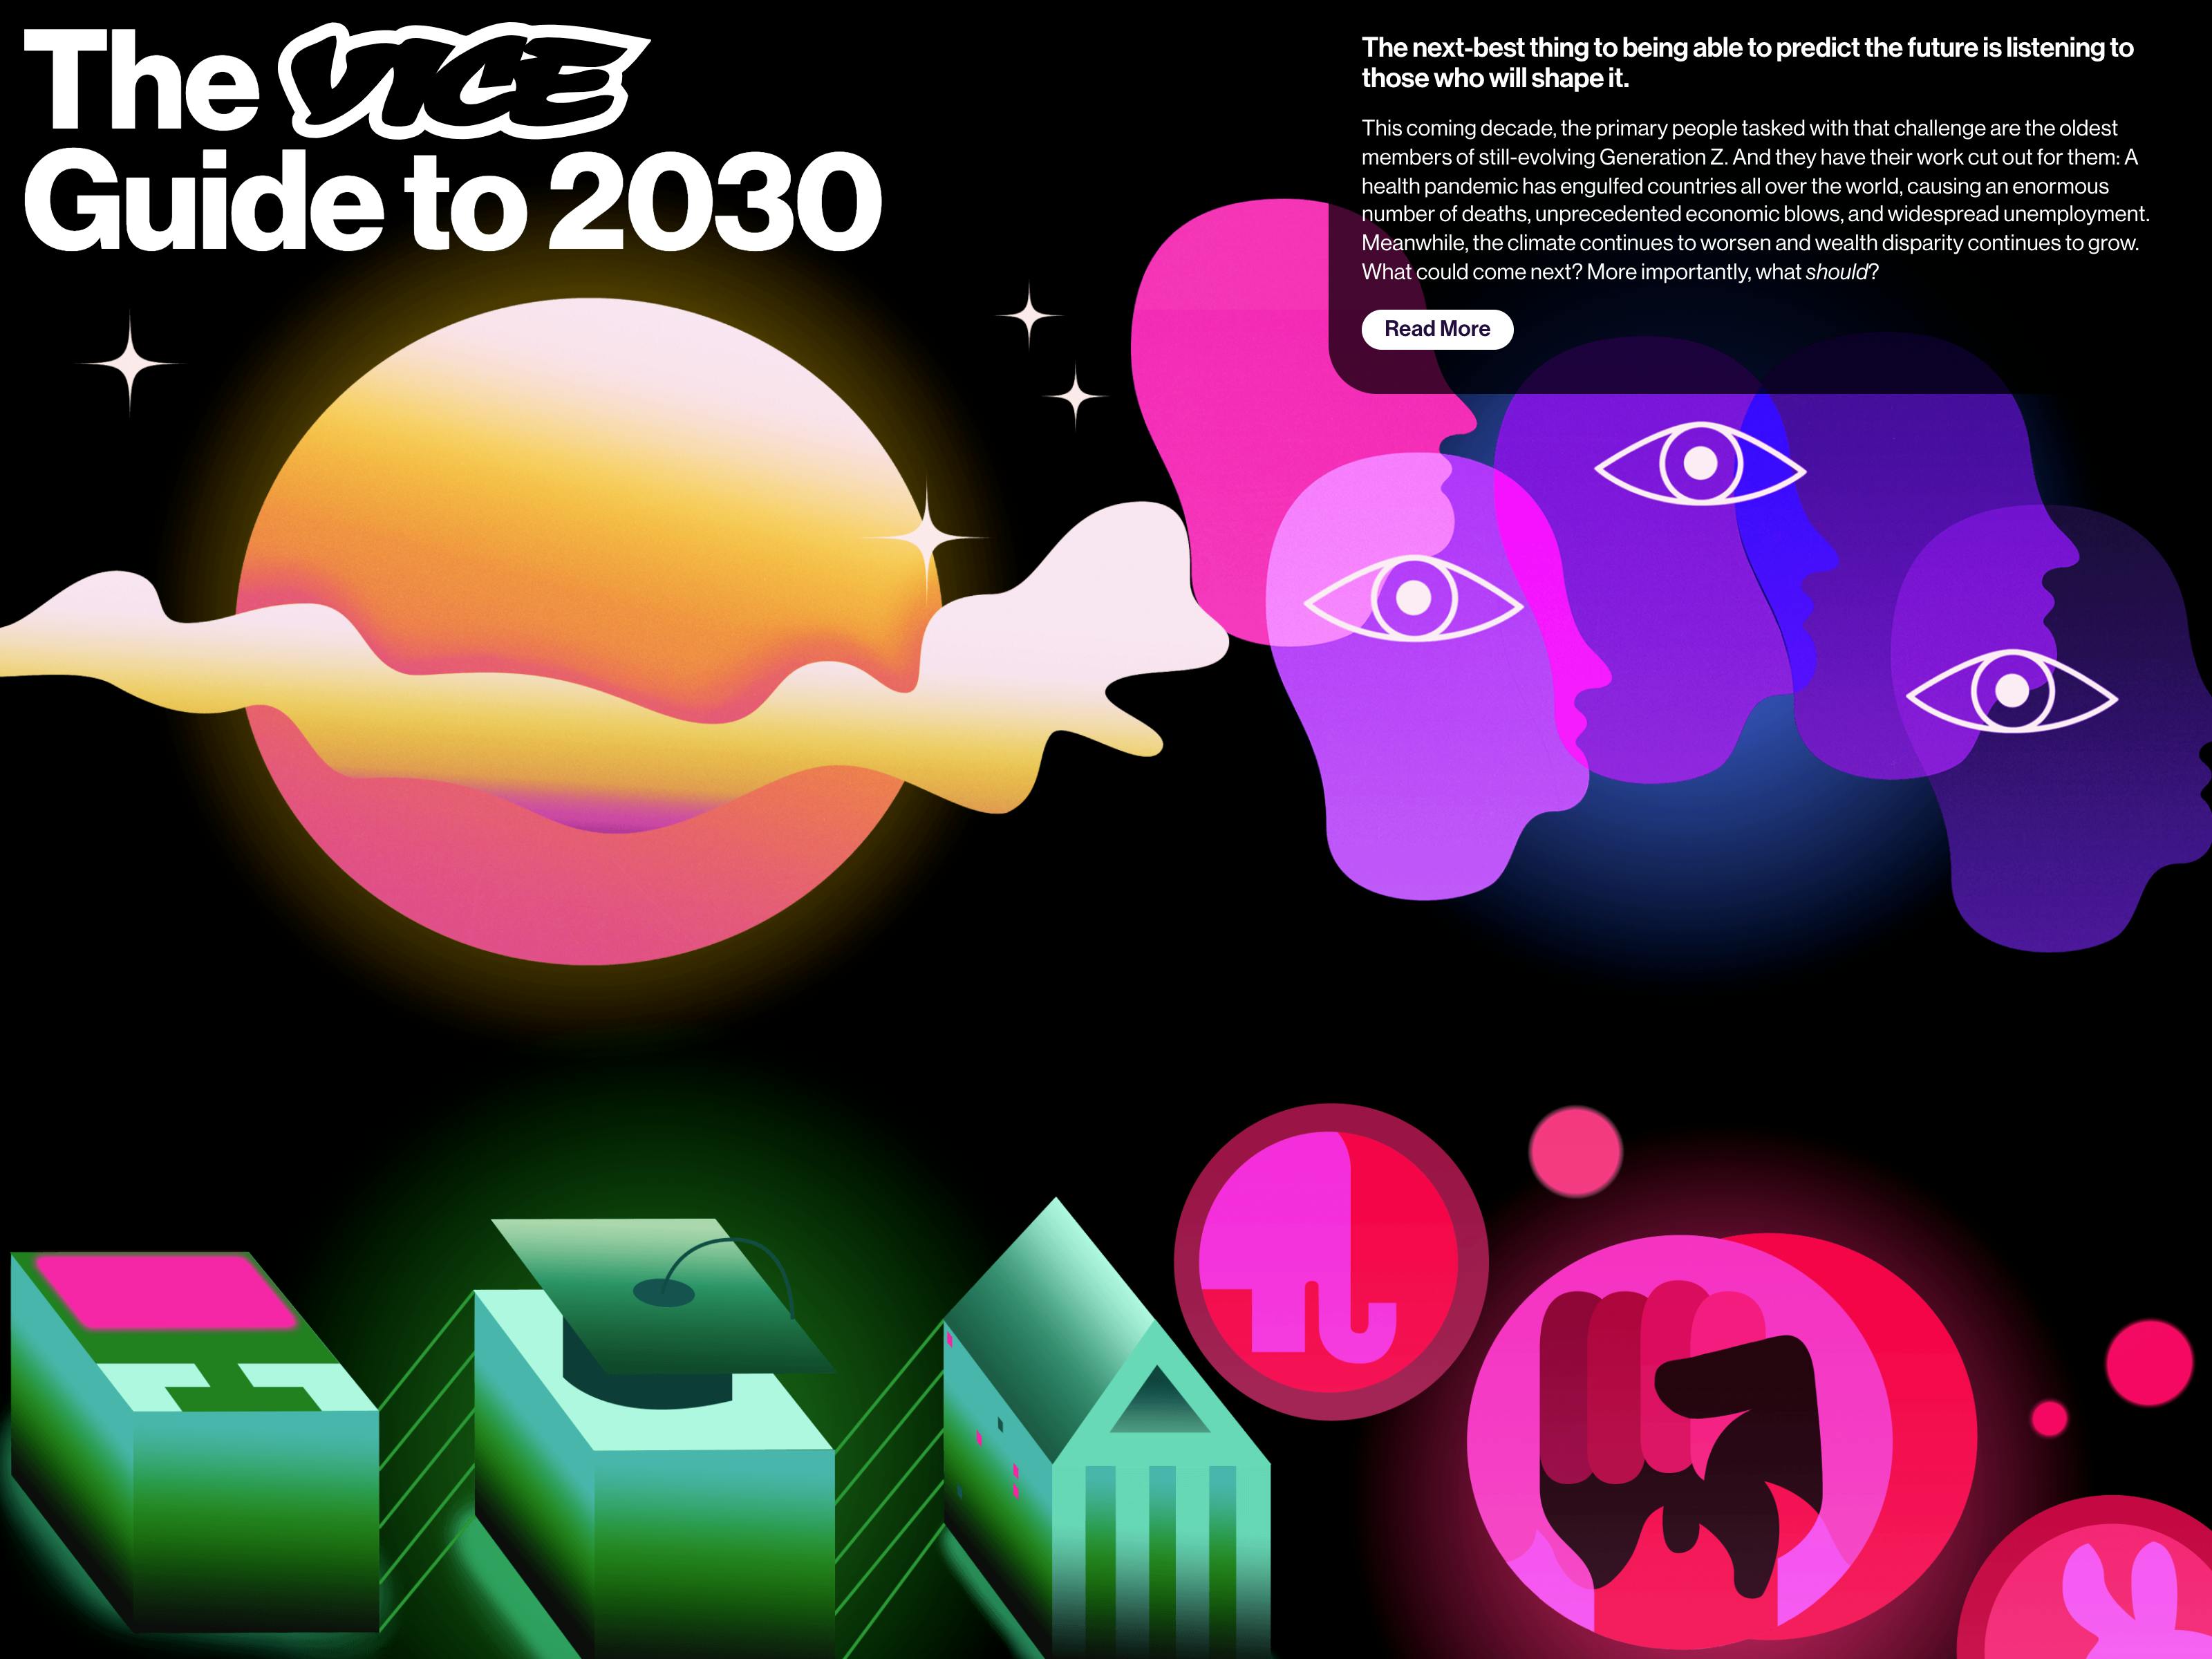 The Vice Guide to 2030 website screenshot